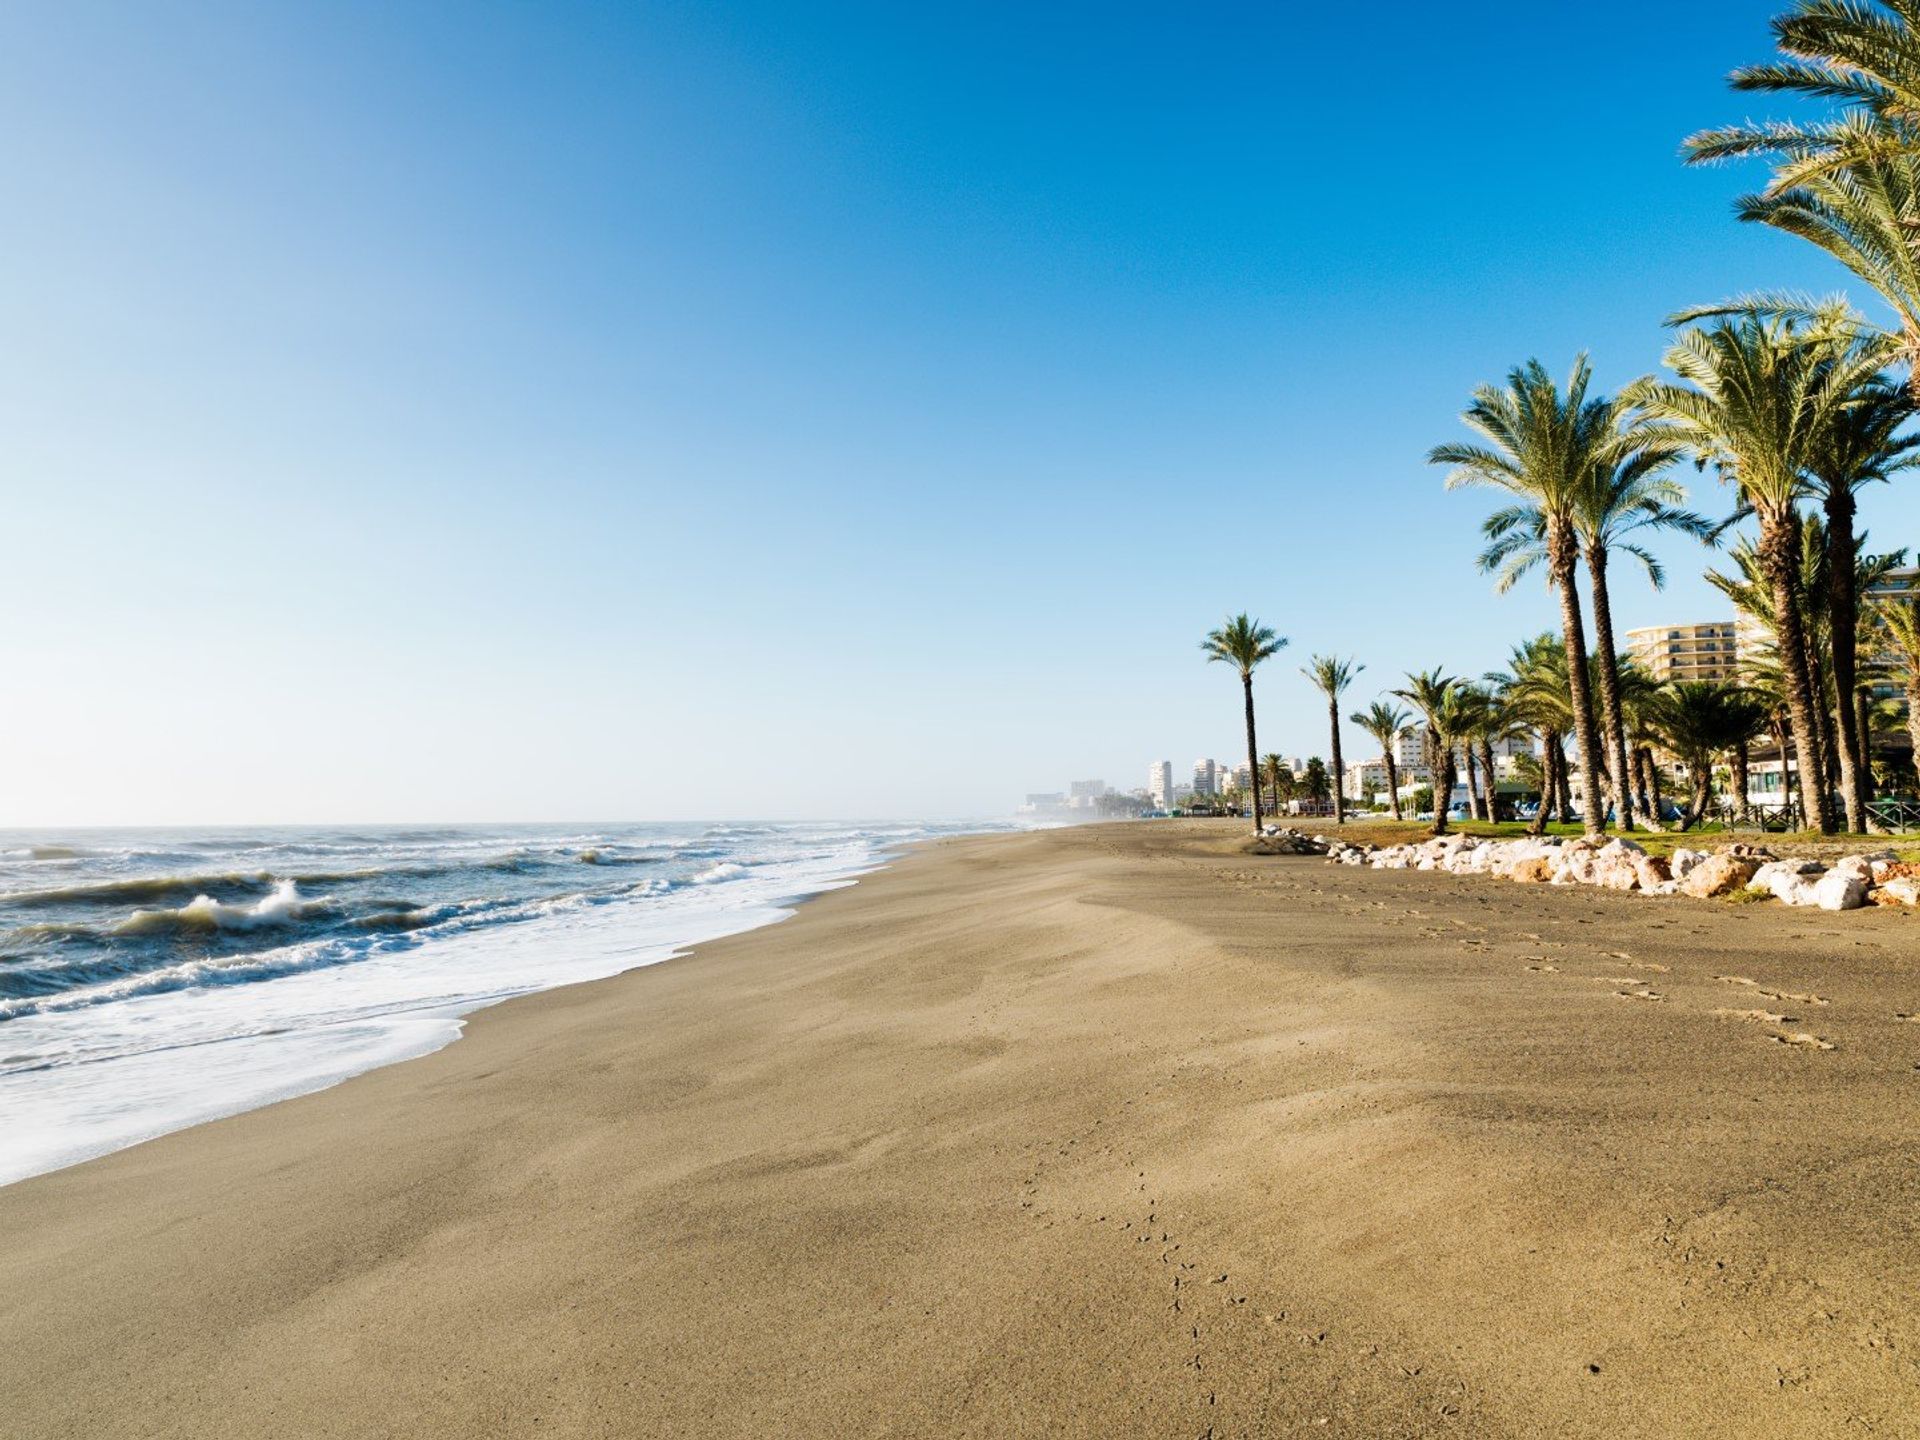 With golden sands and aquamarine waters, La Carihuela beach is the perfect spot for a lazy day by the coast